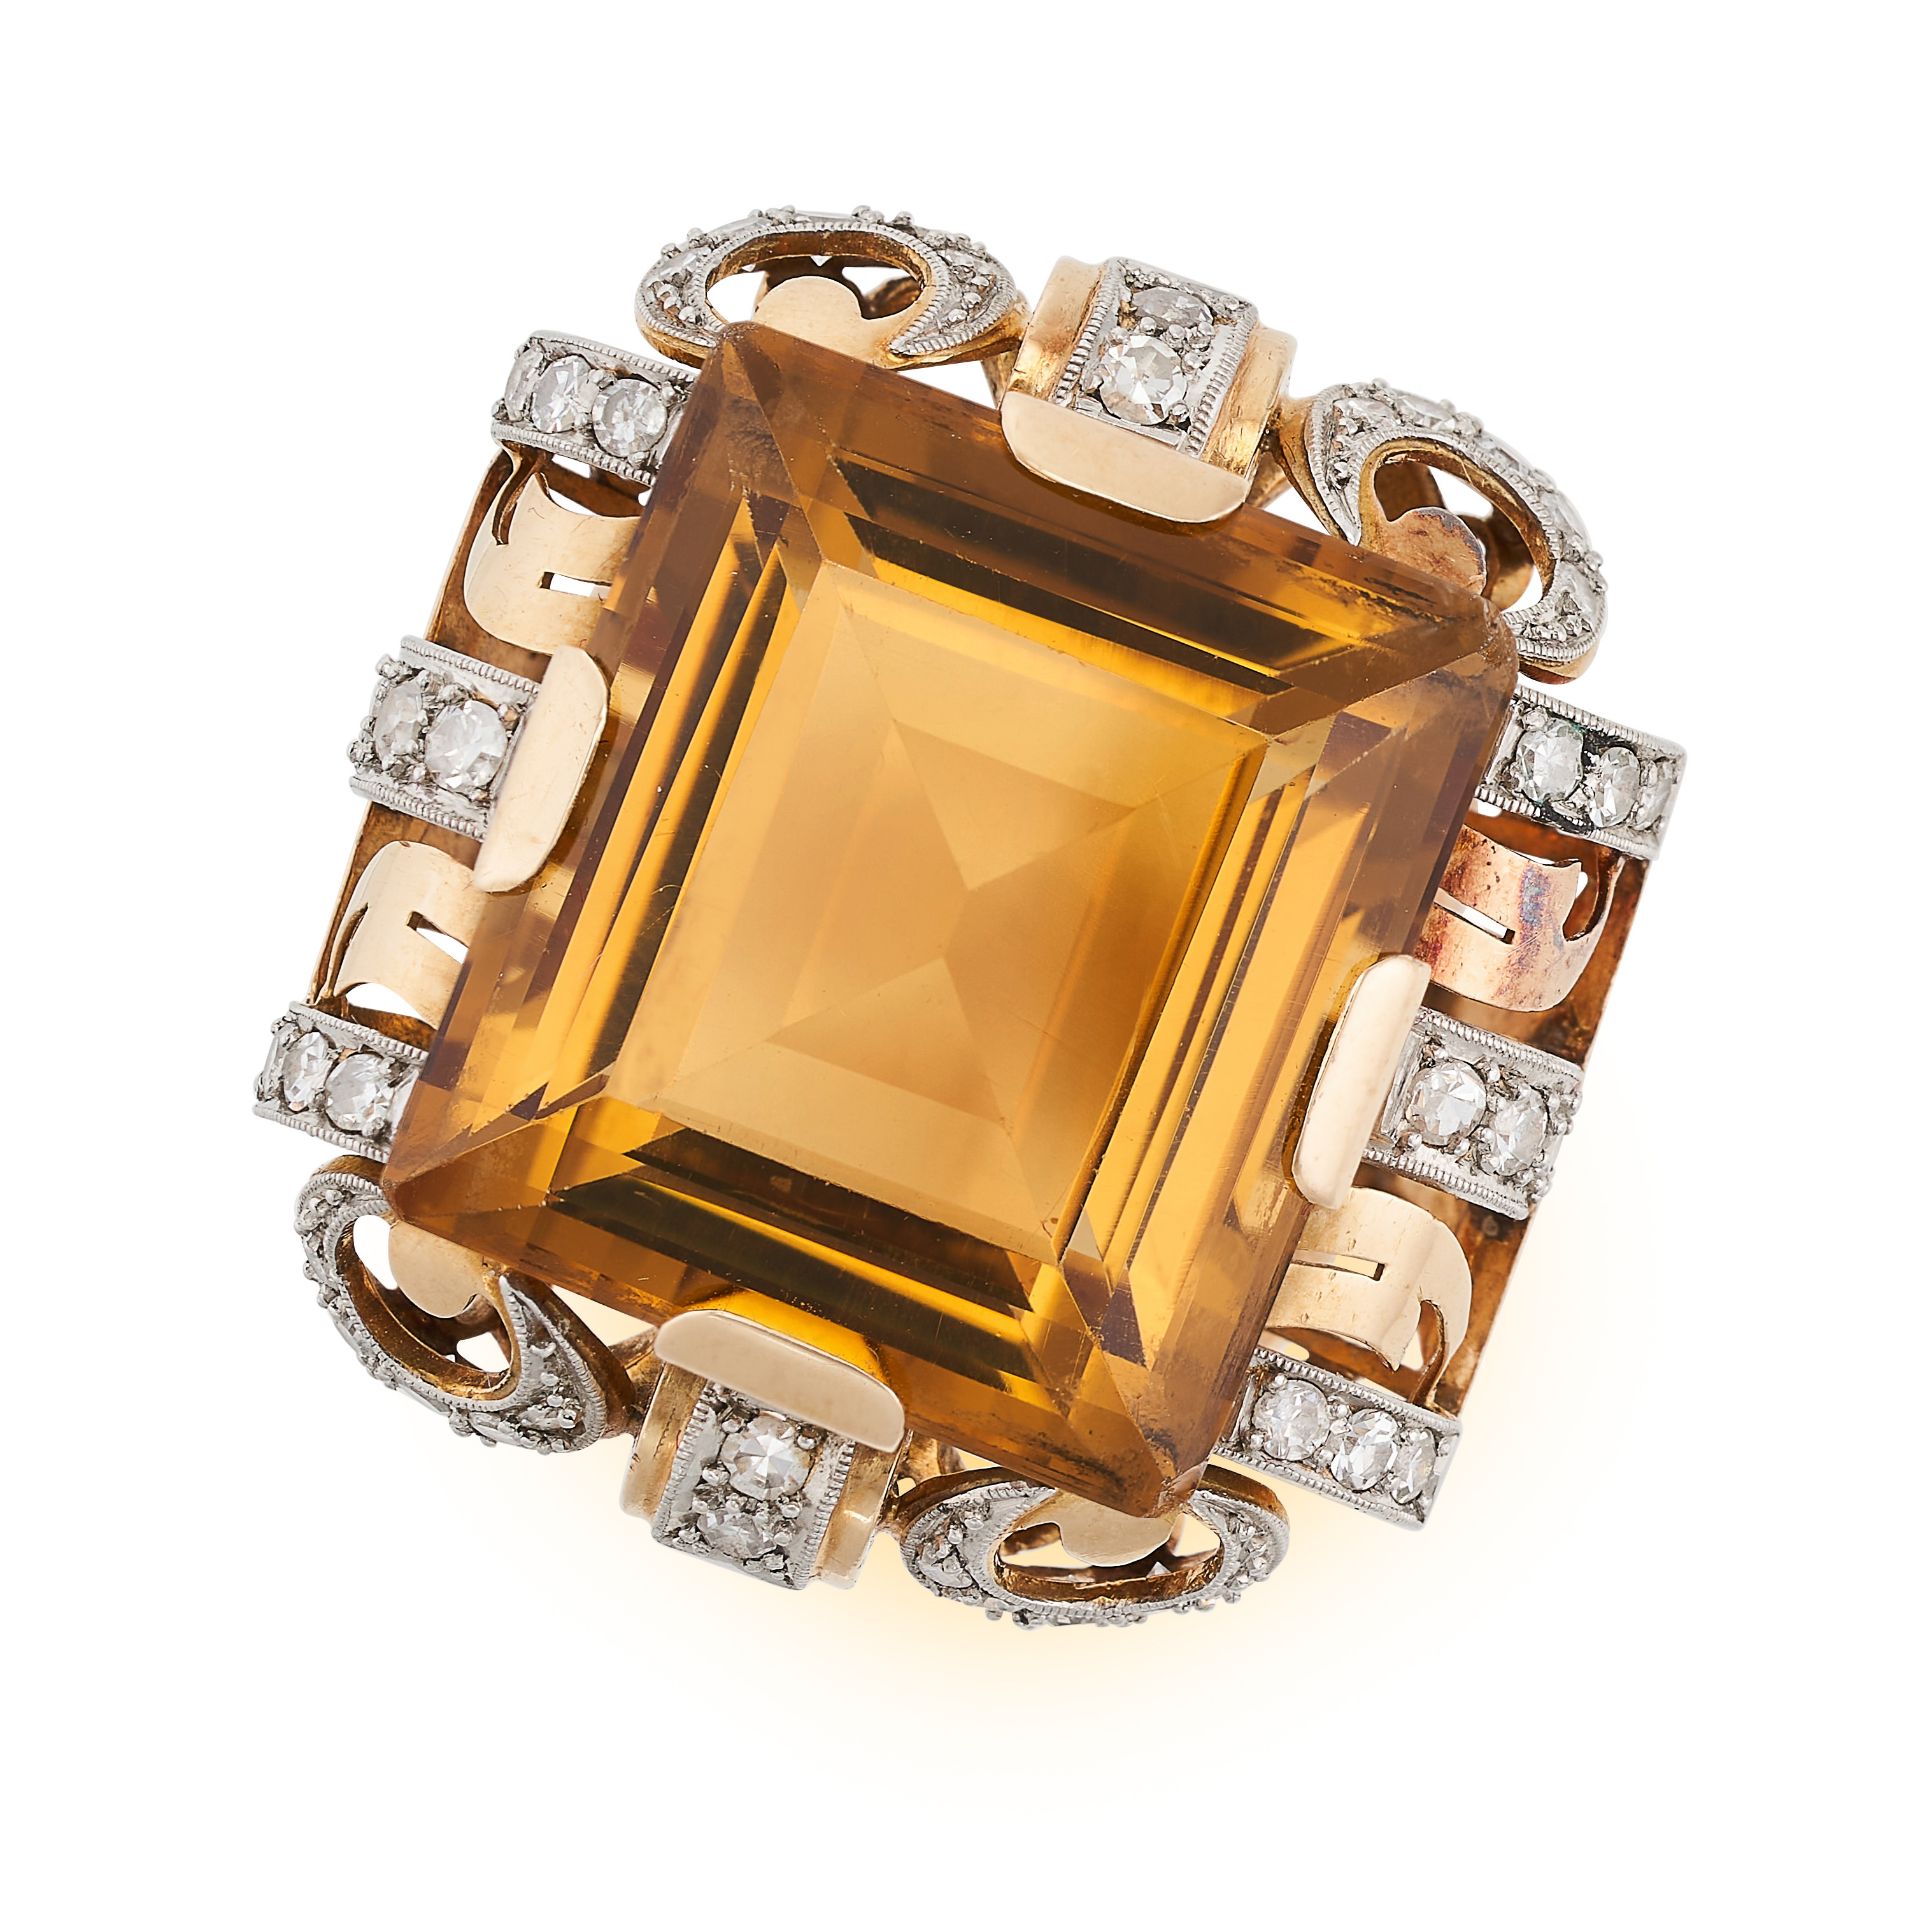 A RETRO CITRINE AND DIAMOND RING COCKTAIL RING in rose and white gold, set with a step cut citrin...